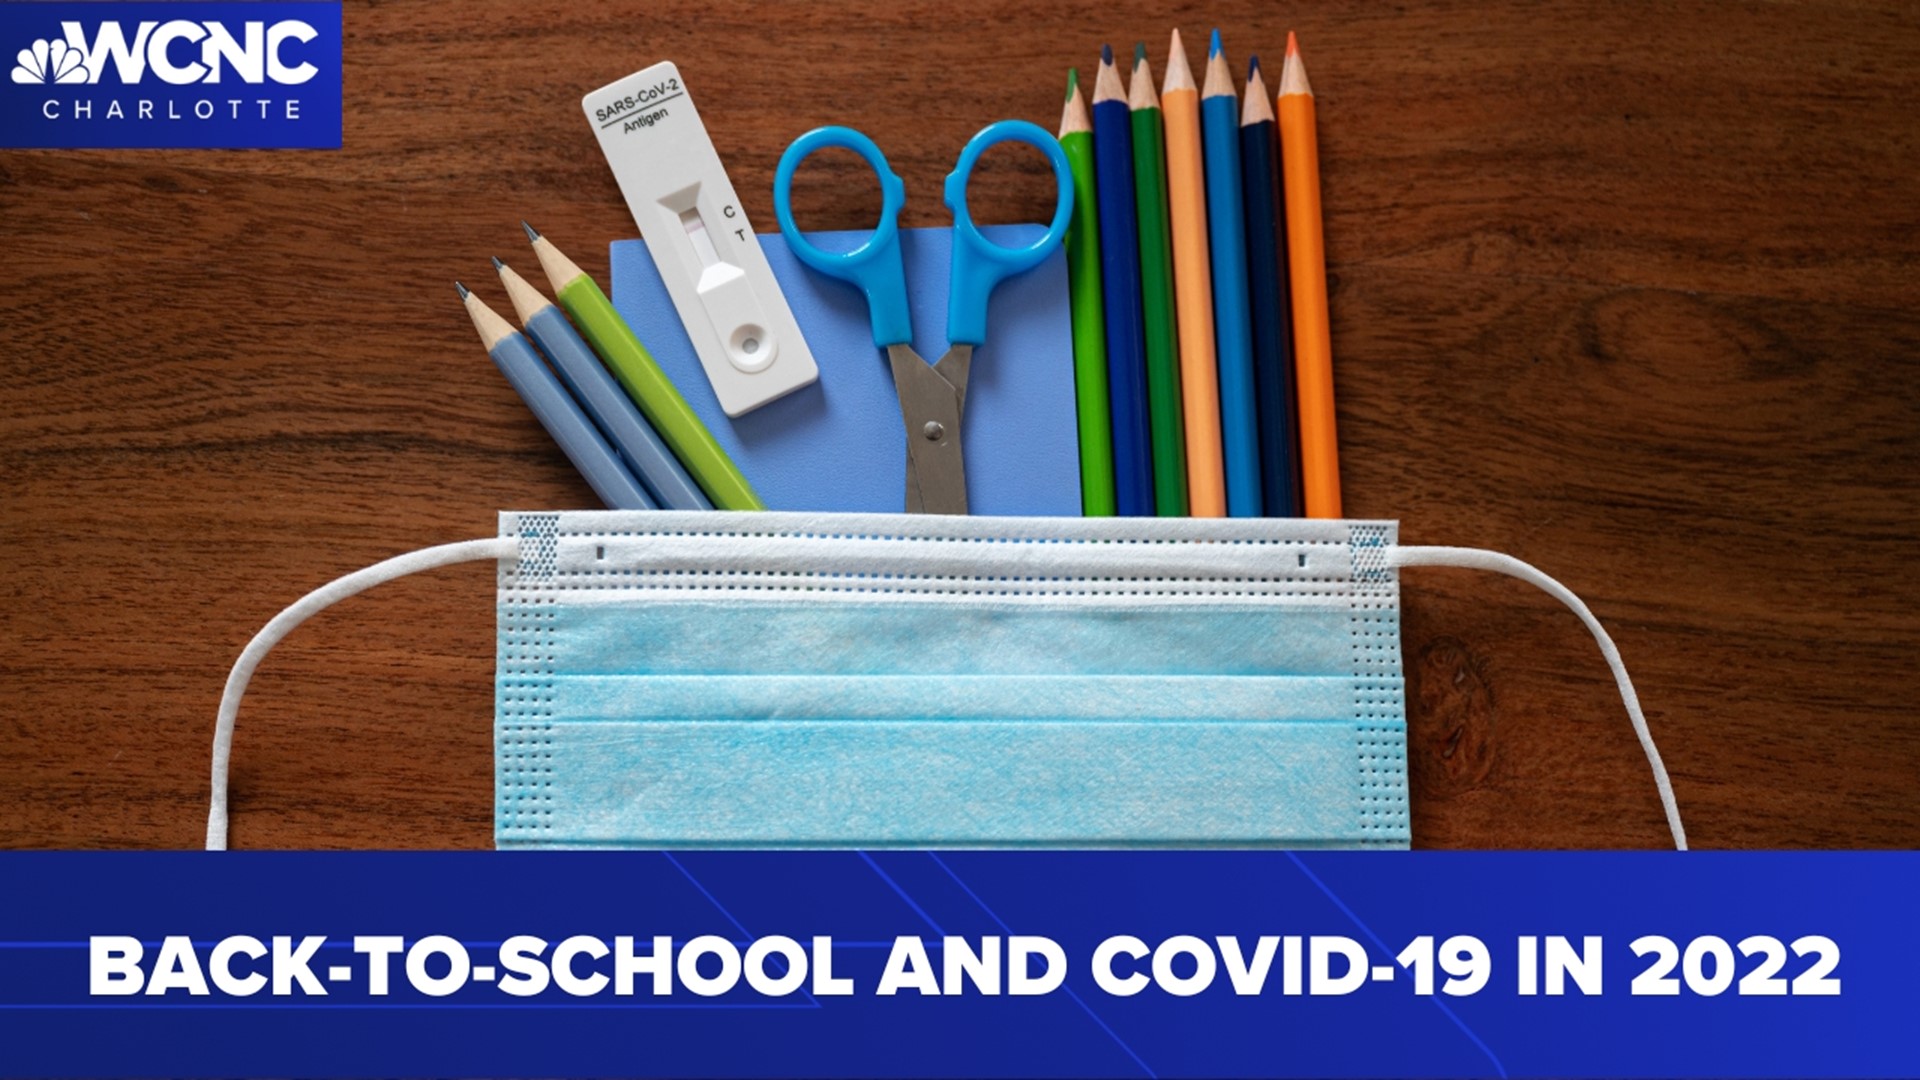 The CDC released updated guidelines that scale back COVID testing and isolation in school districts.